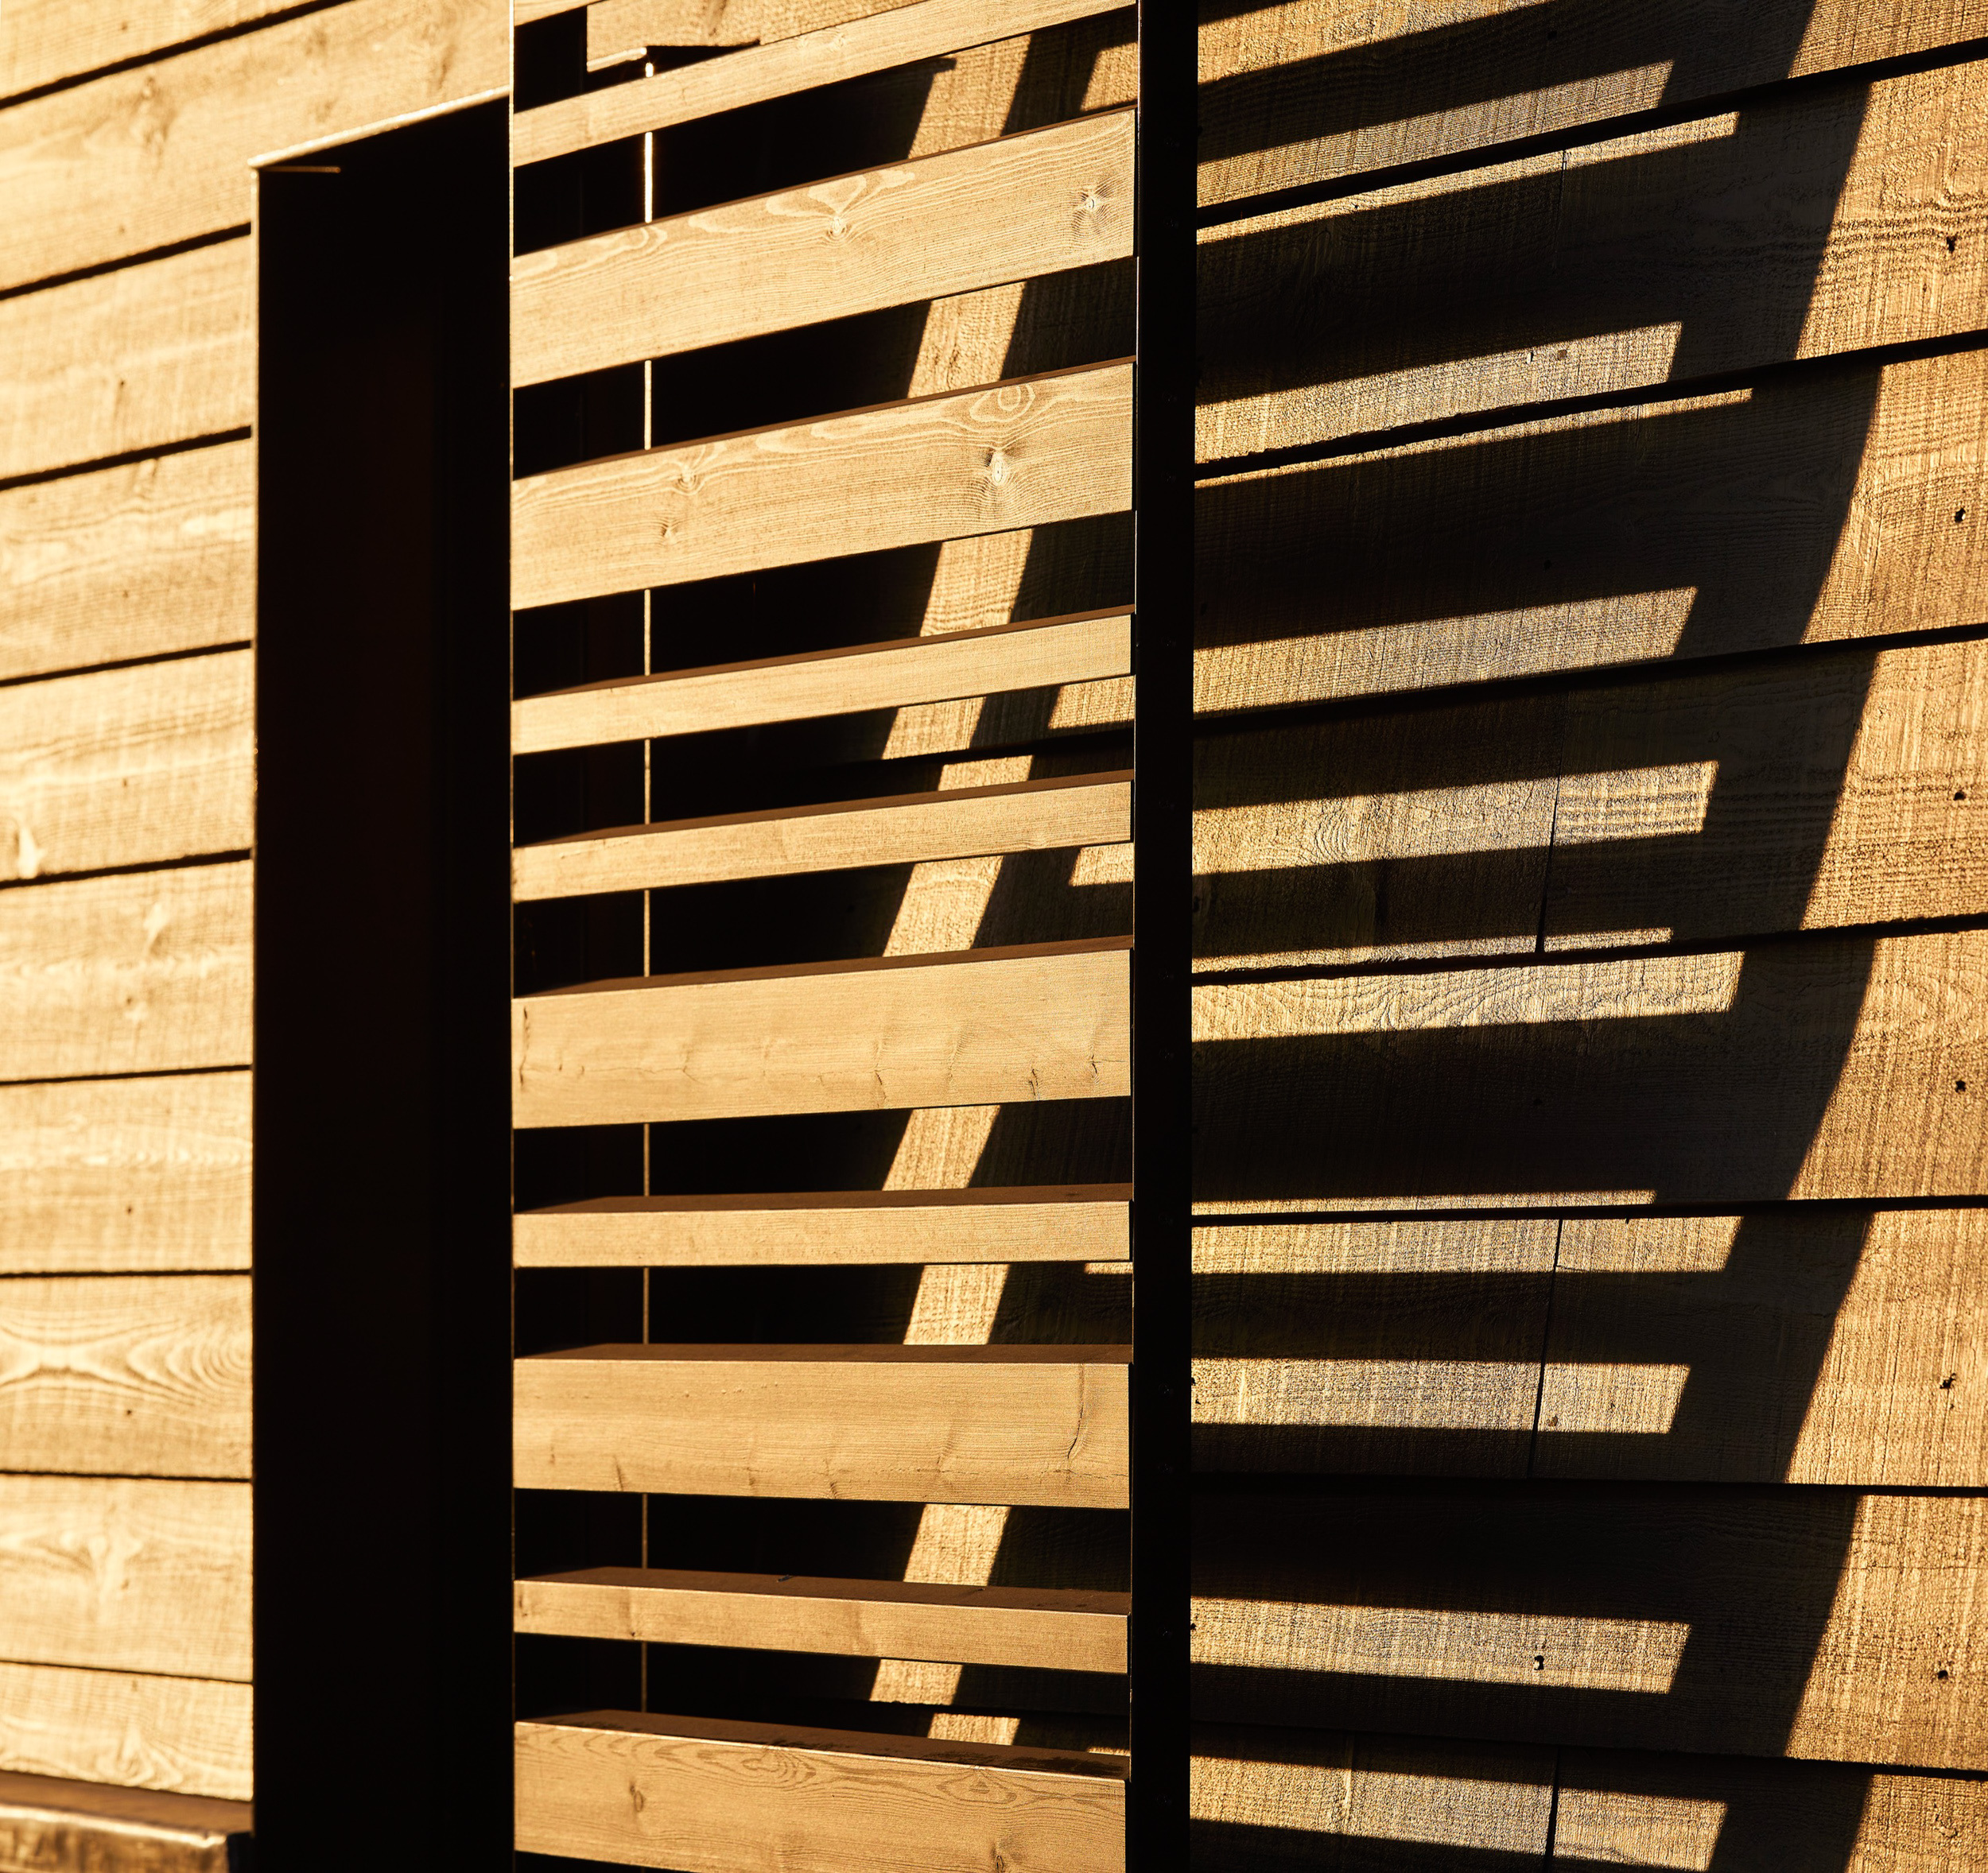 Horizontal timber shutters with strong shadows | cdc studio cambridge architects